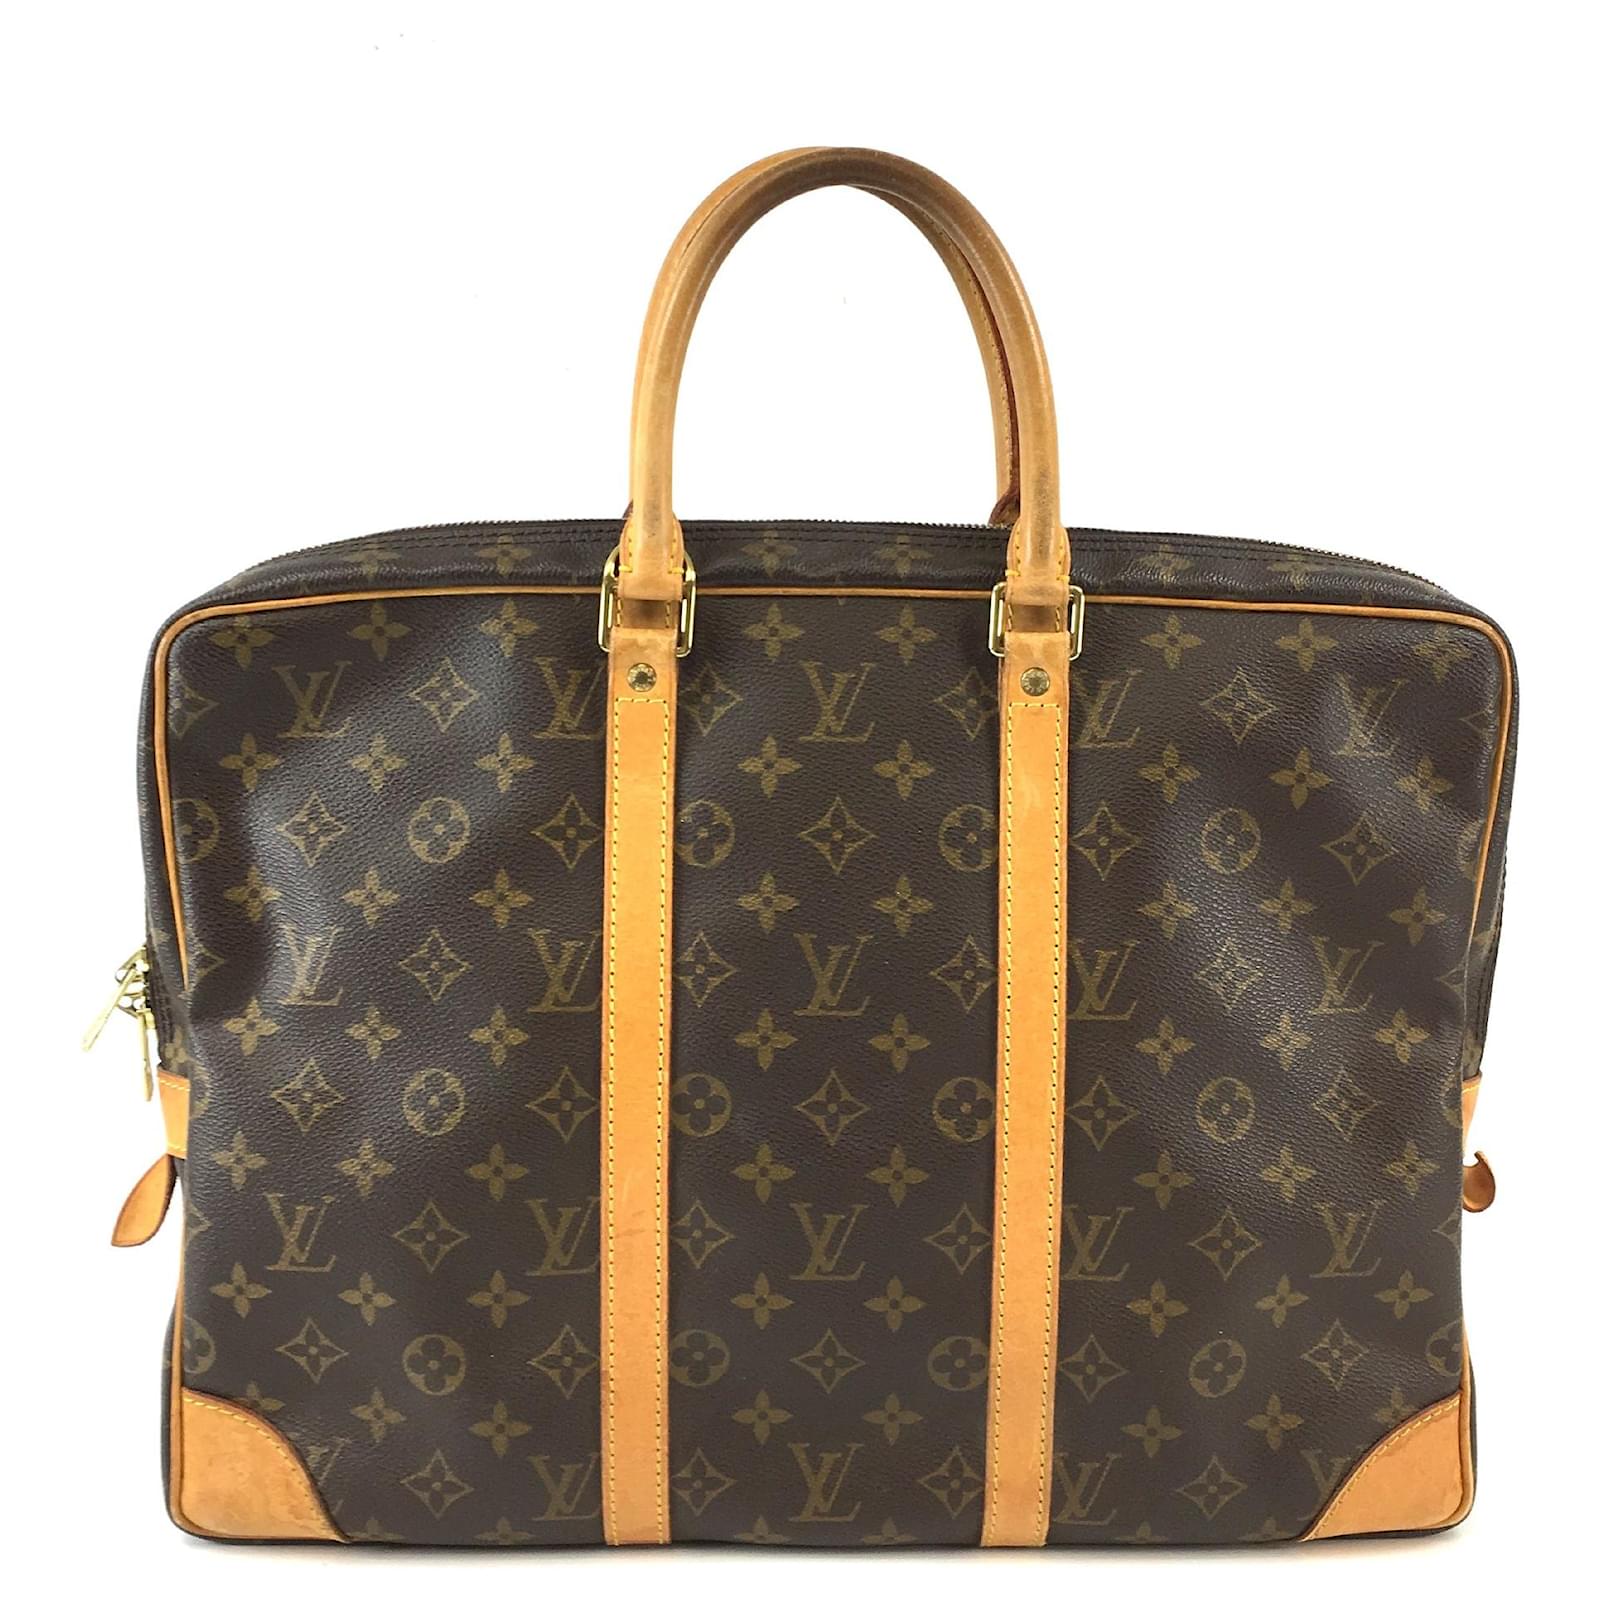 Louis Vuitton Brief Case In Excellent Condition and Authentic